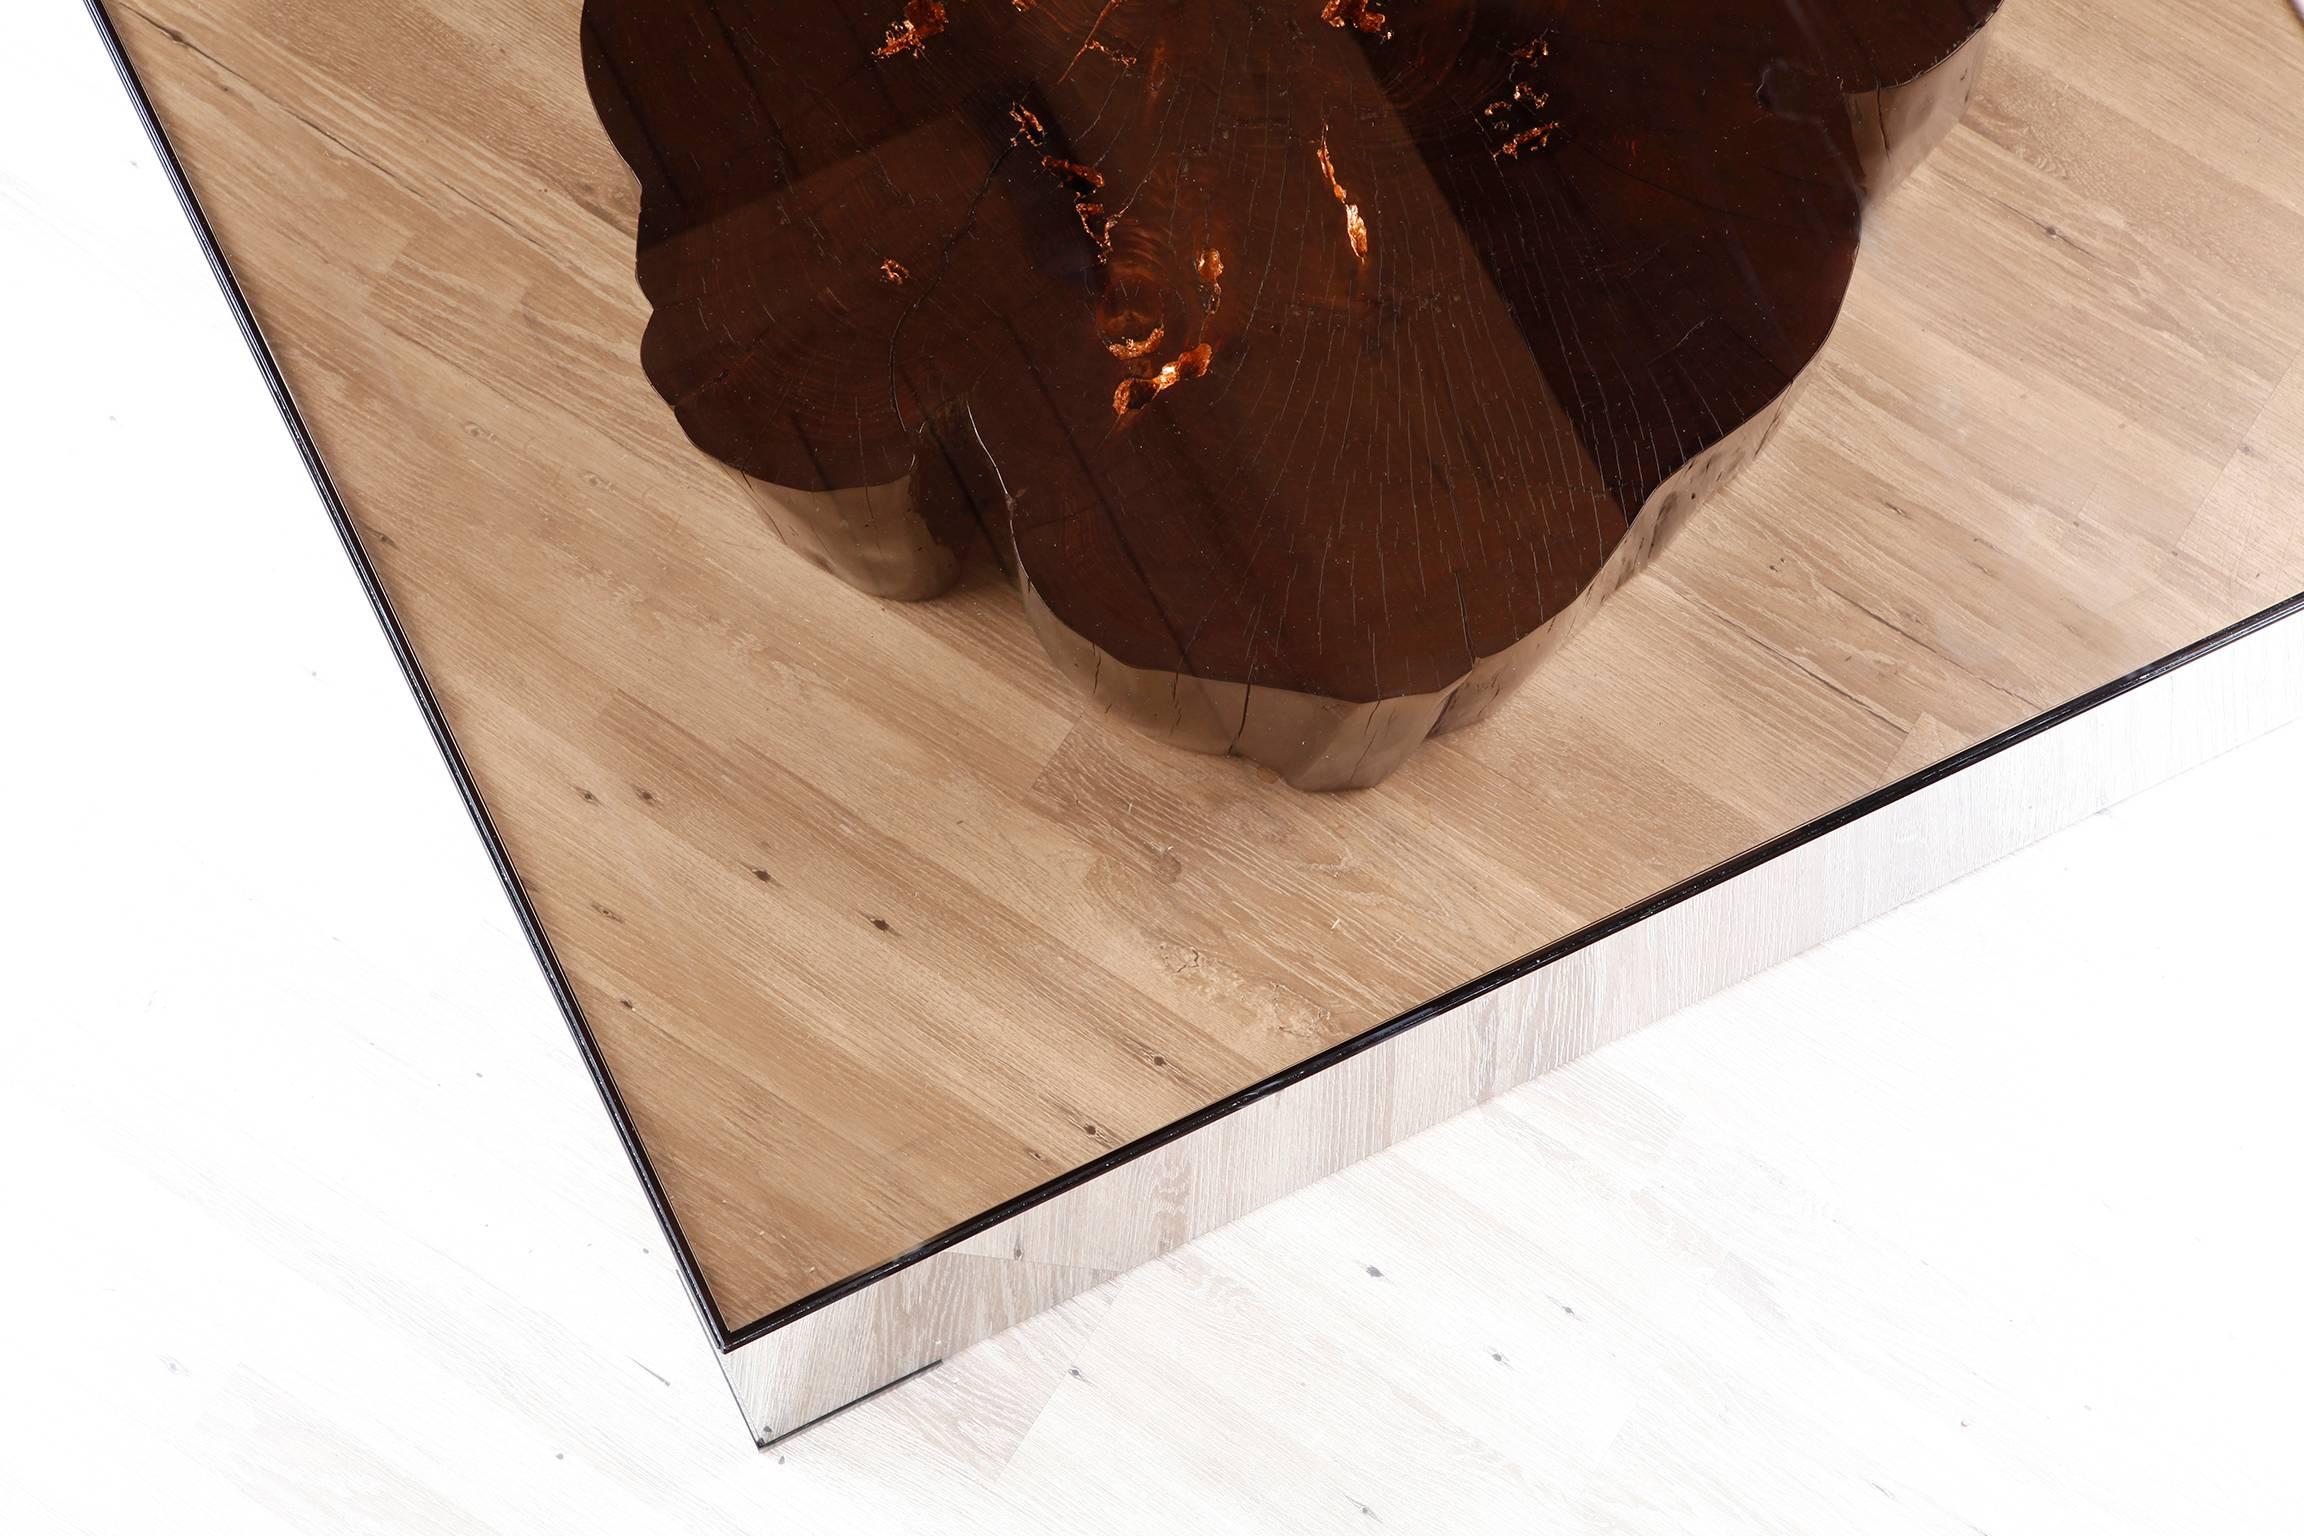 American Treasures of Decay Limited Glass Edition, Sculptural Tables by Studio Roeper For Sale